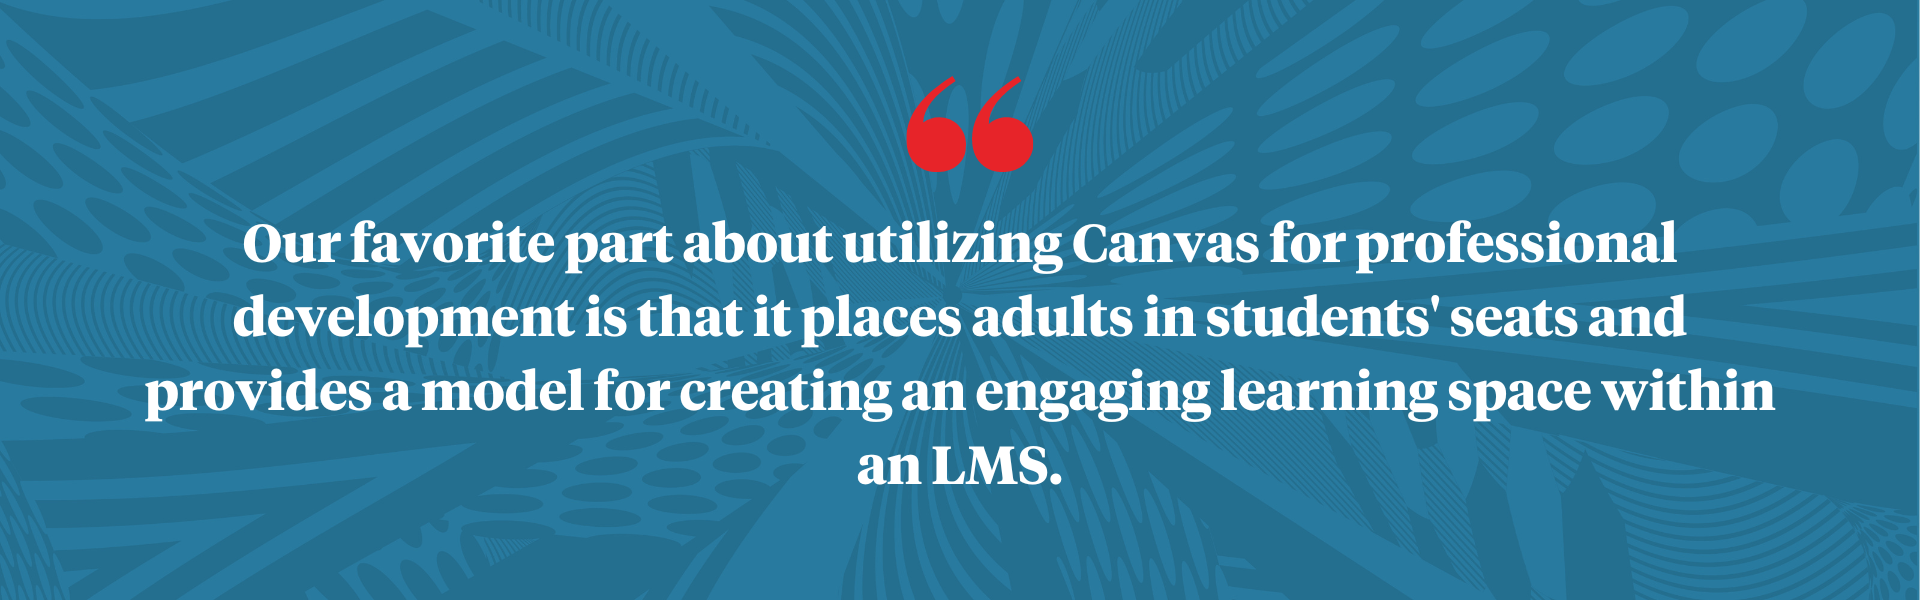 image: blue splashy background with red quote that reads "Our favorite part about utilizing Canvas for professional development is that it places adults in students' seats and provides a model for creating an engaging learning space within an LMS"